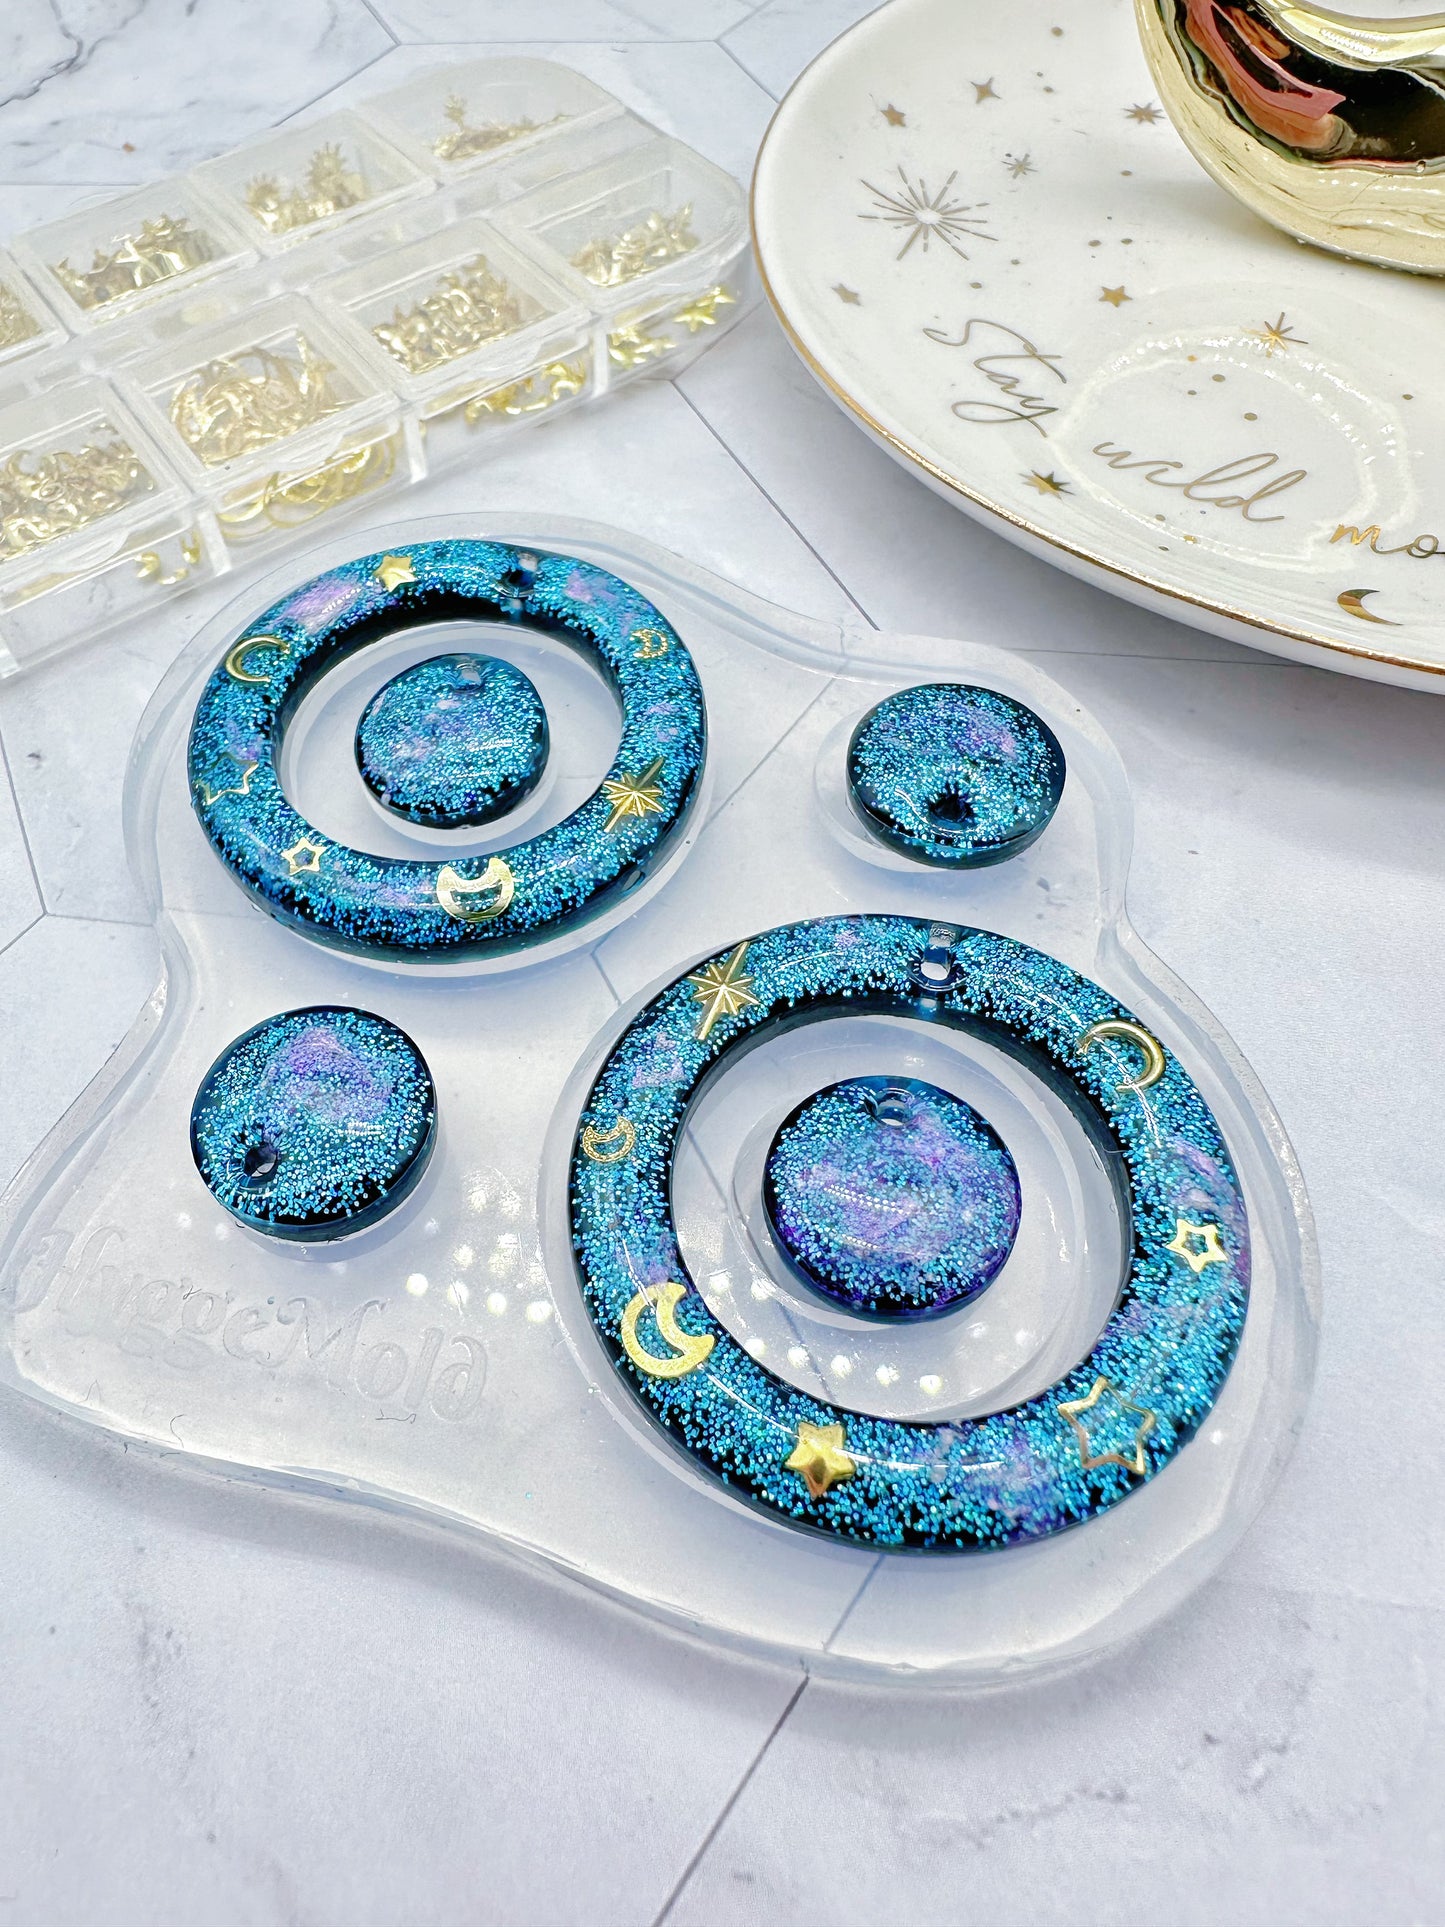 Nested Circle Dangle Earring Mold Statement Earring Silicone Mold